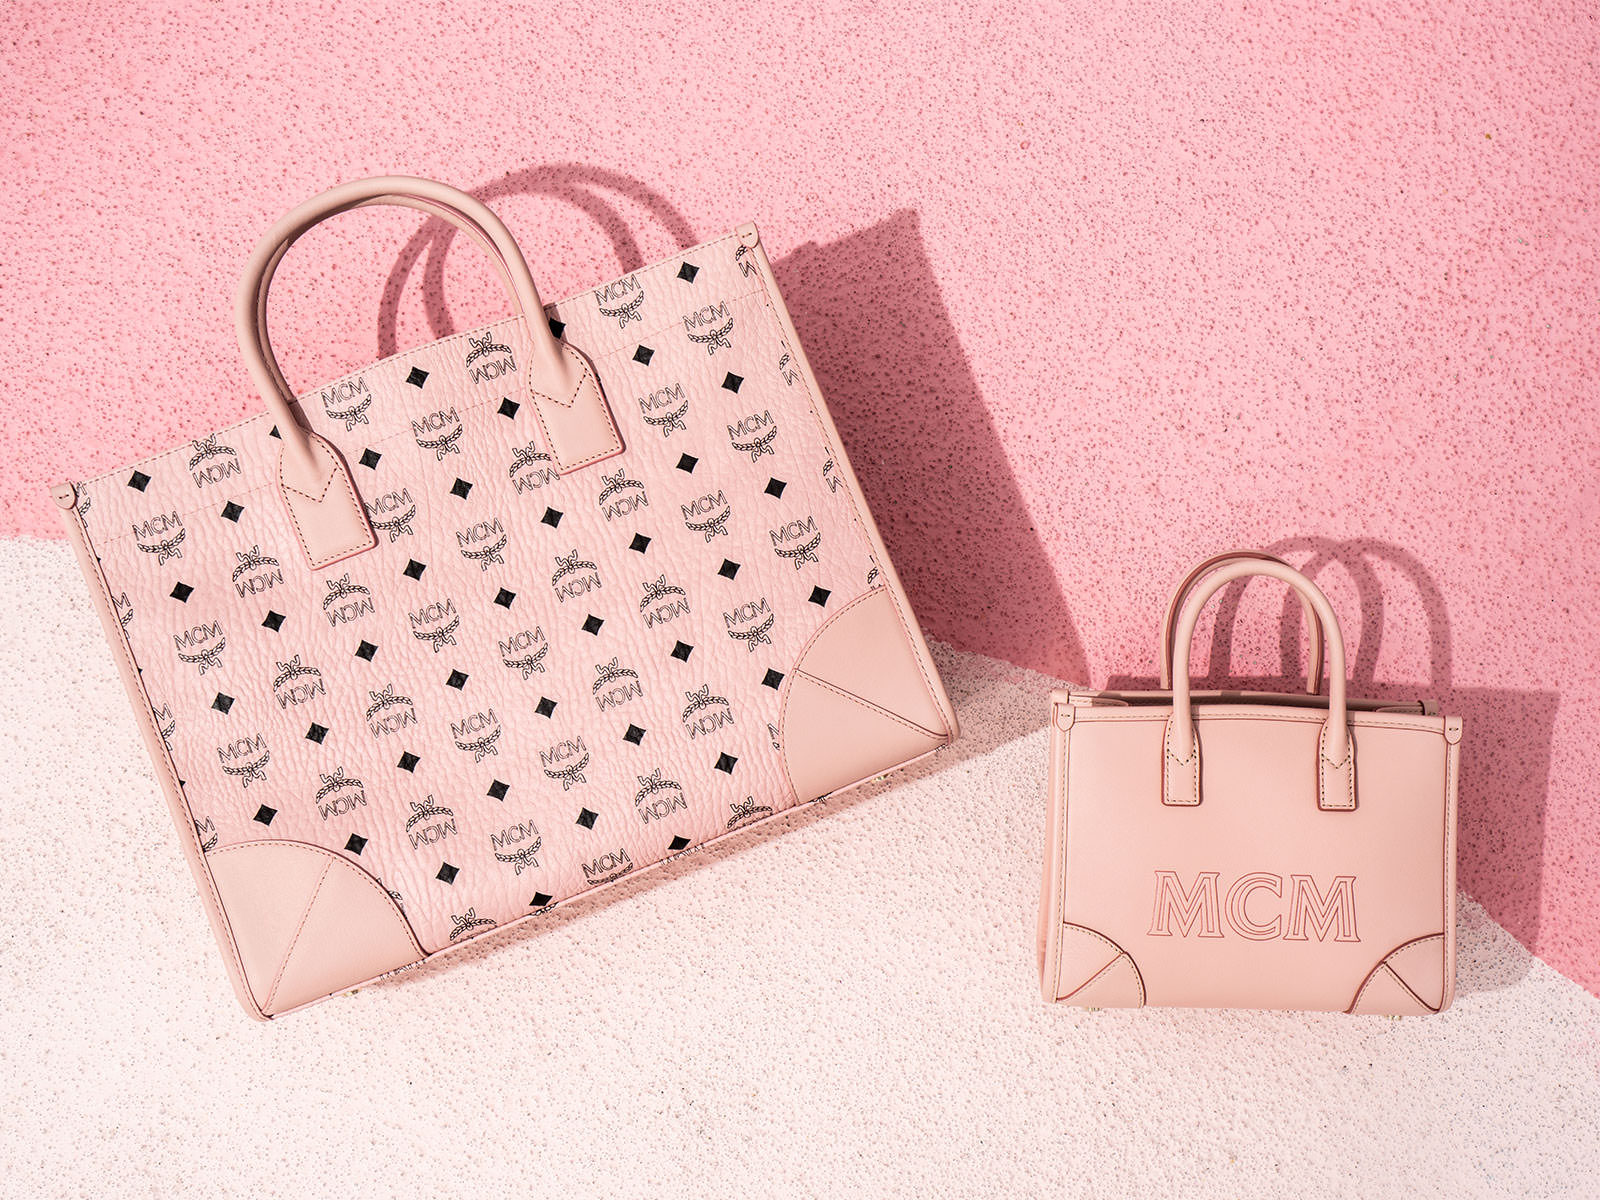 MCM Munchen Totes in Soft Pink